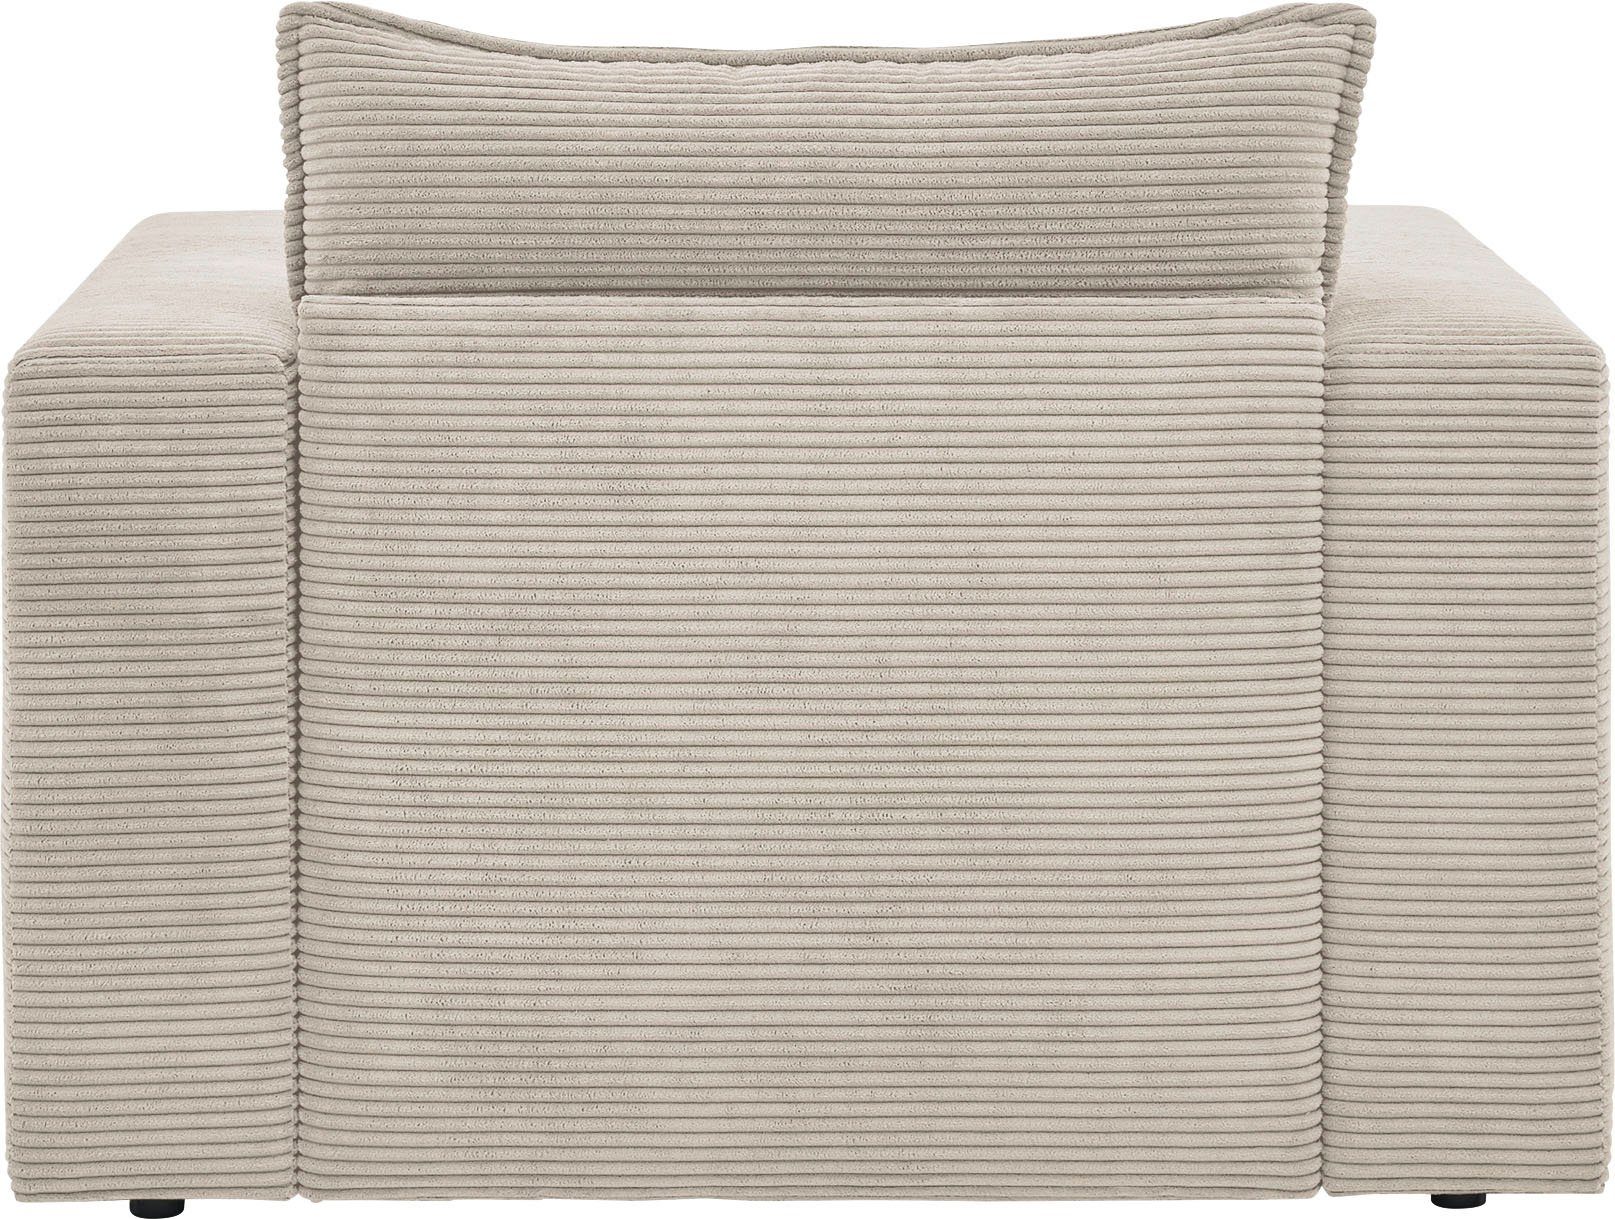 Cord- zur Places Serie passend Hochwertiger of Style PIAGGE, PIAGGE Sessel Hellbeige